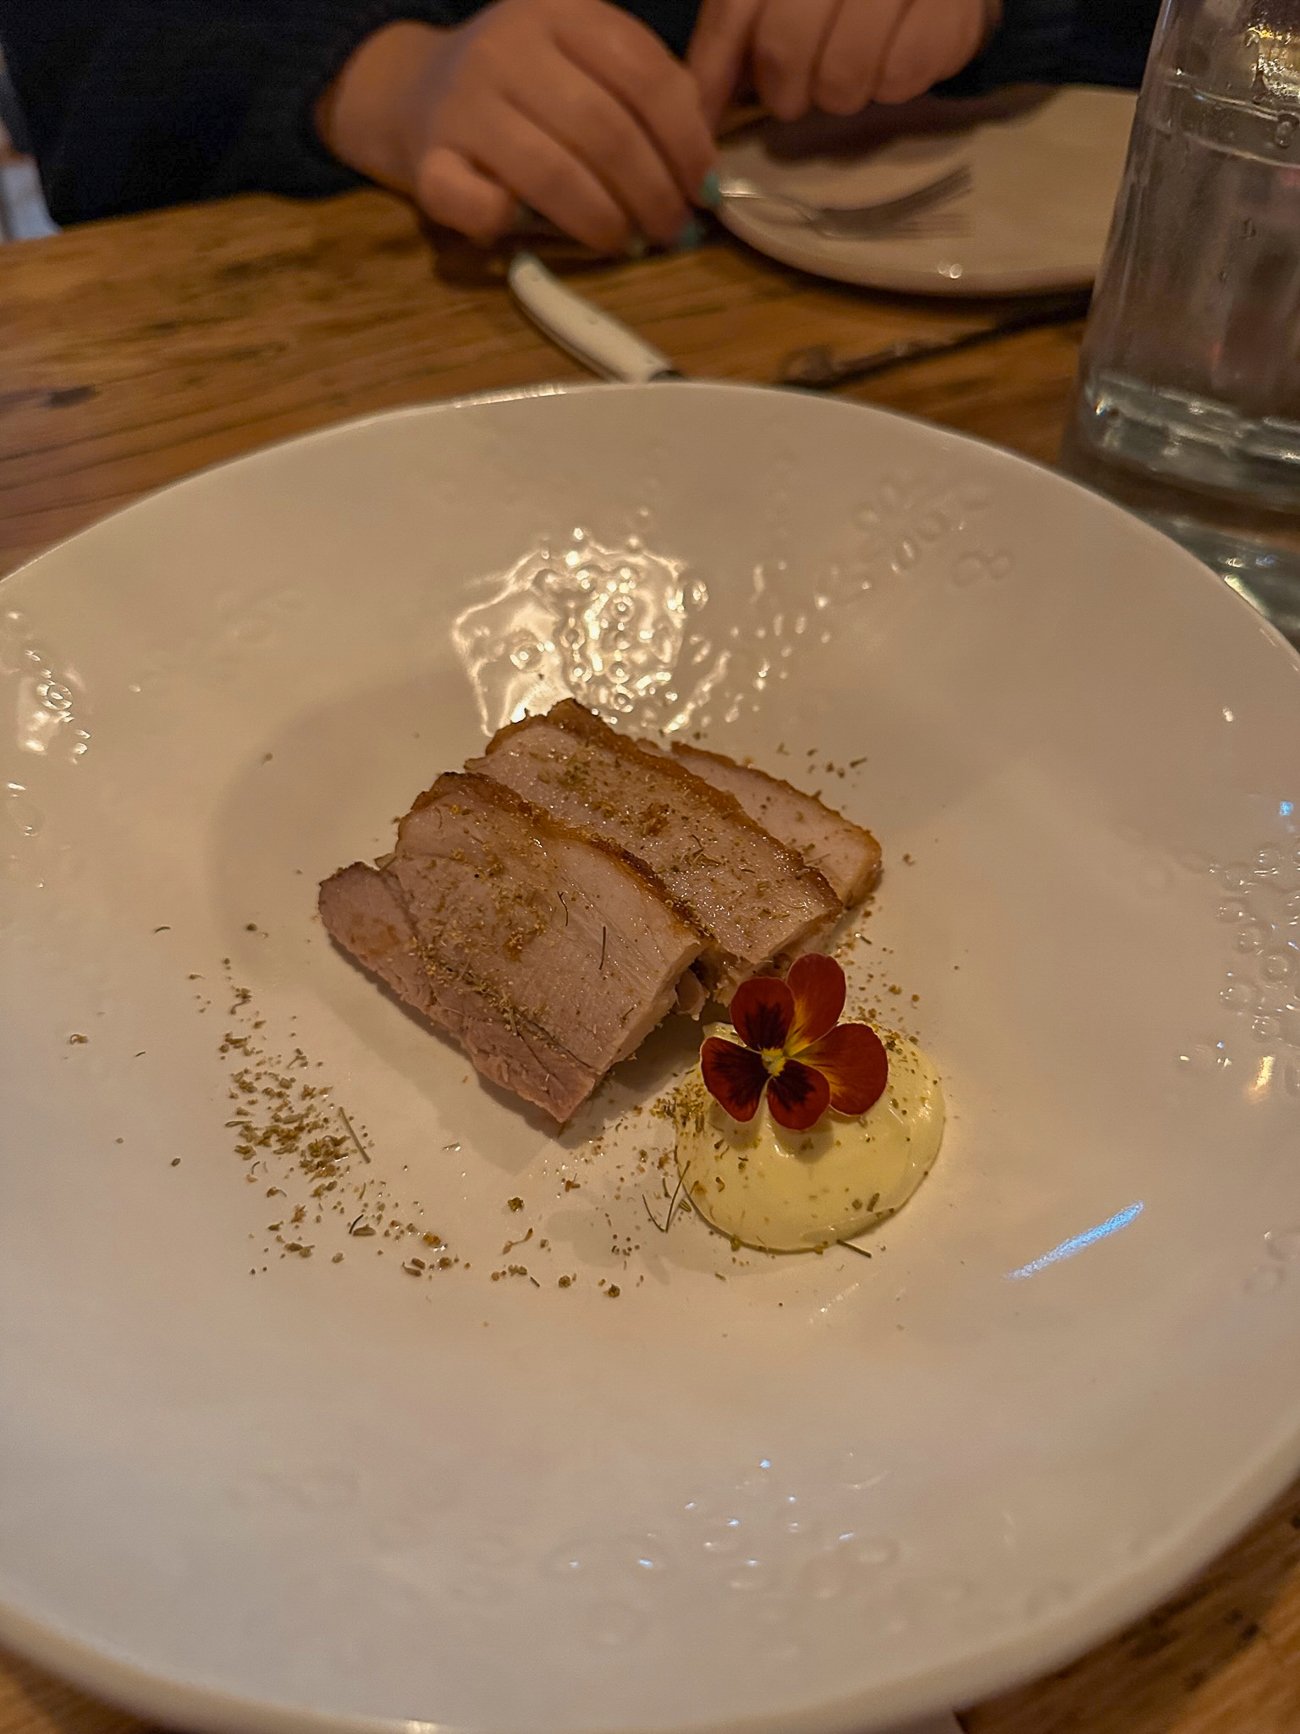 Crispy pork belly with fennel pollen and mayonnaise at The Lost Kitchen